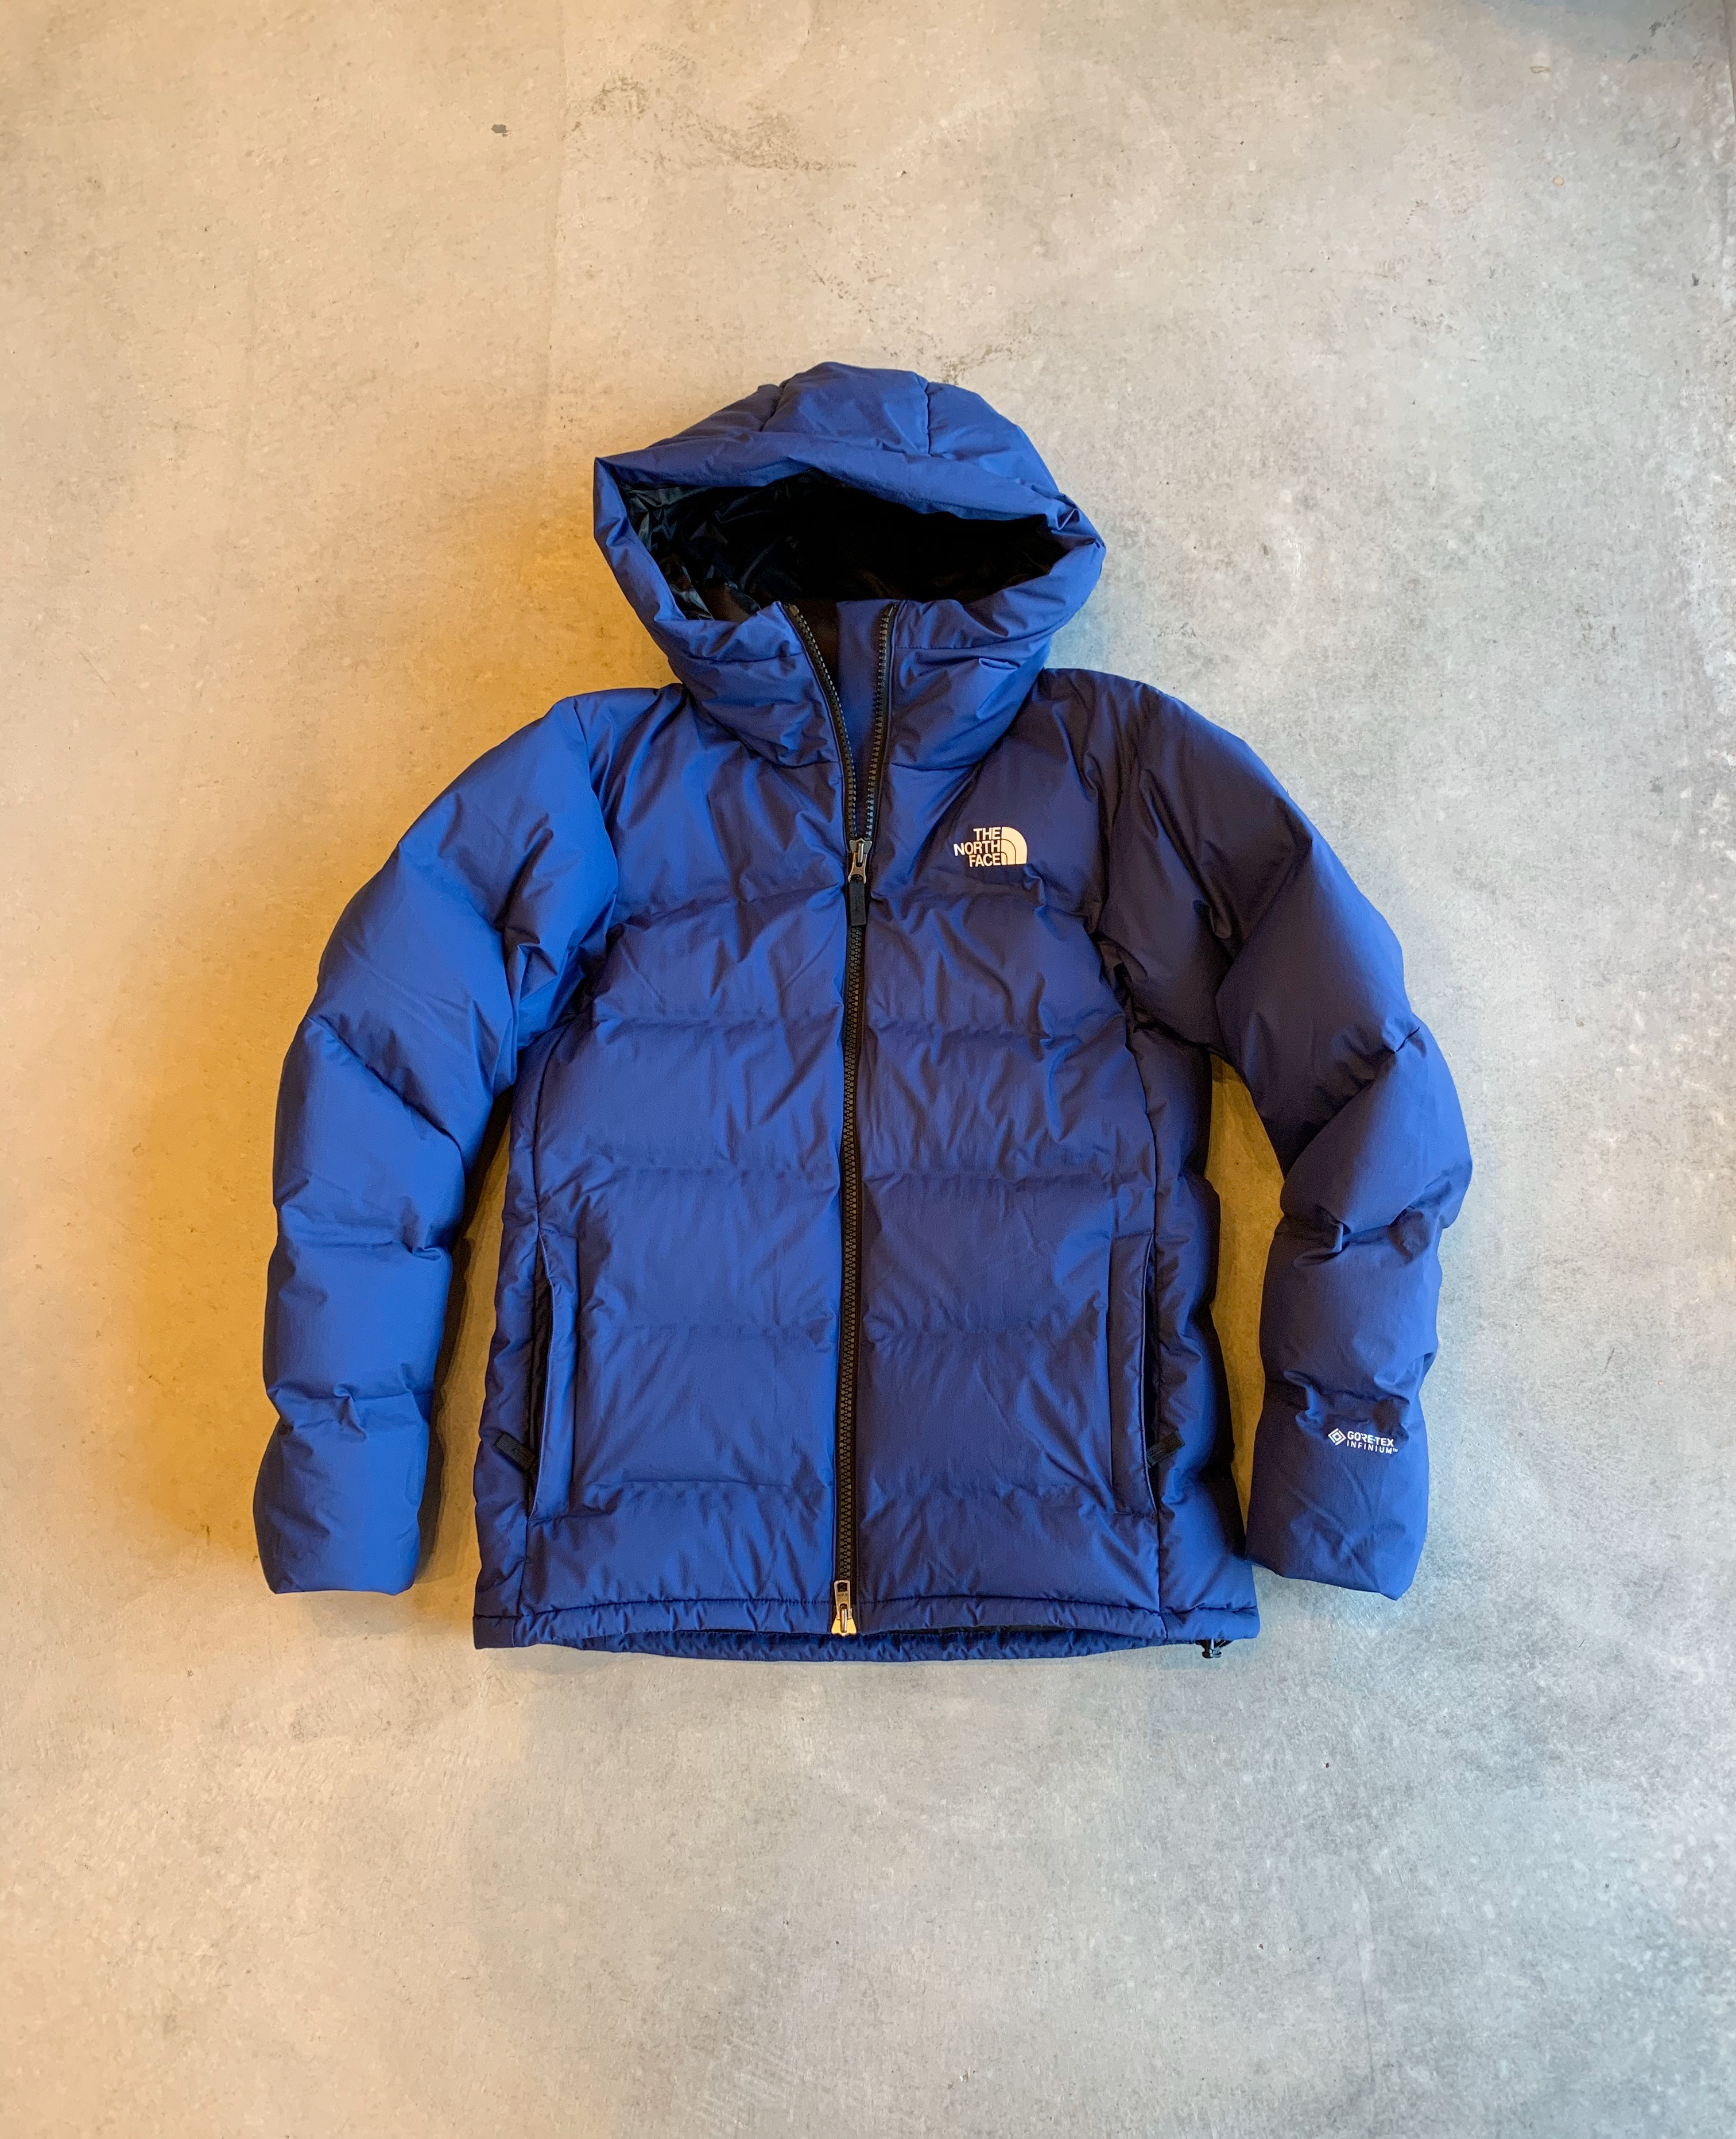 THE NORTH FACE BELAYER PARKA | large